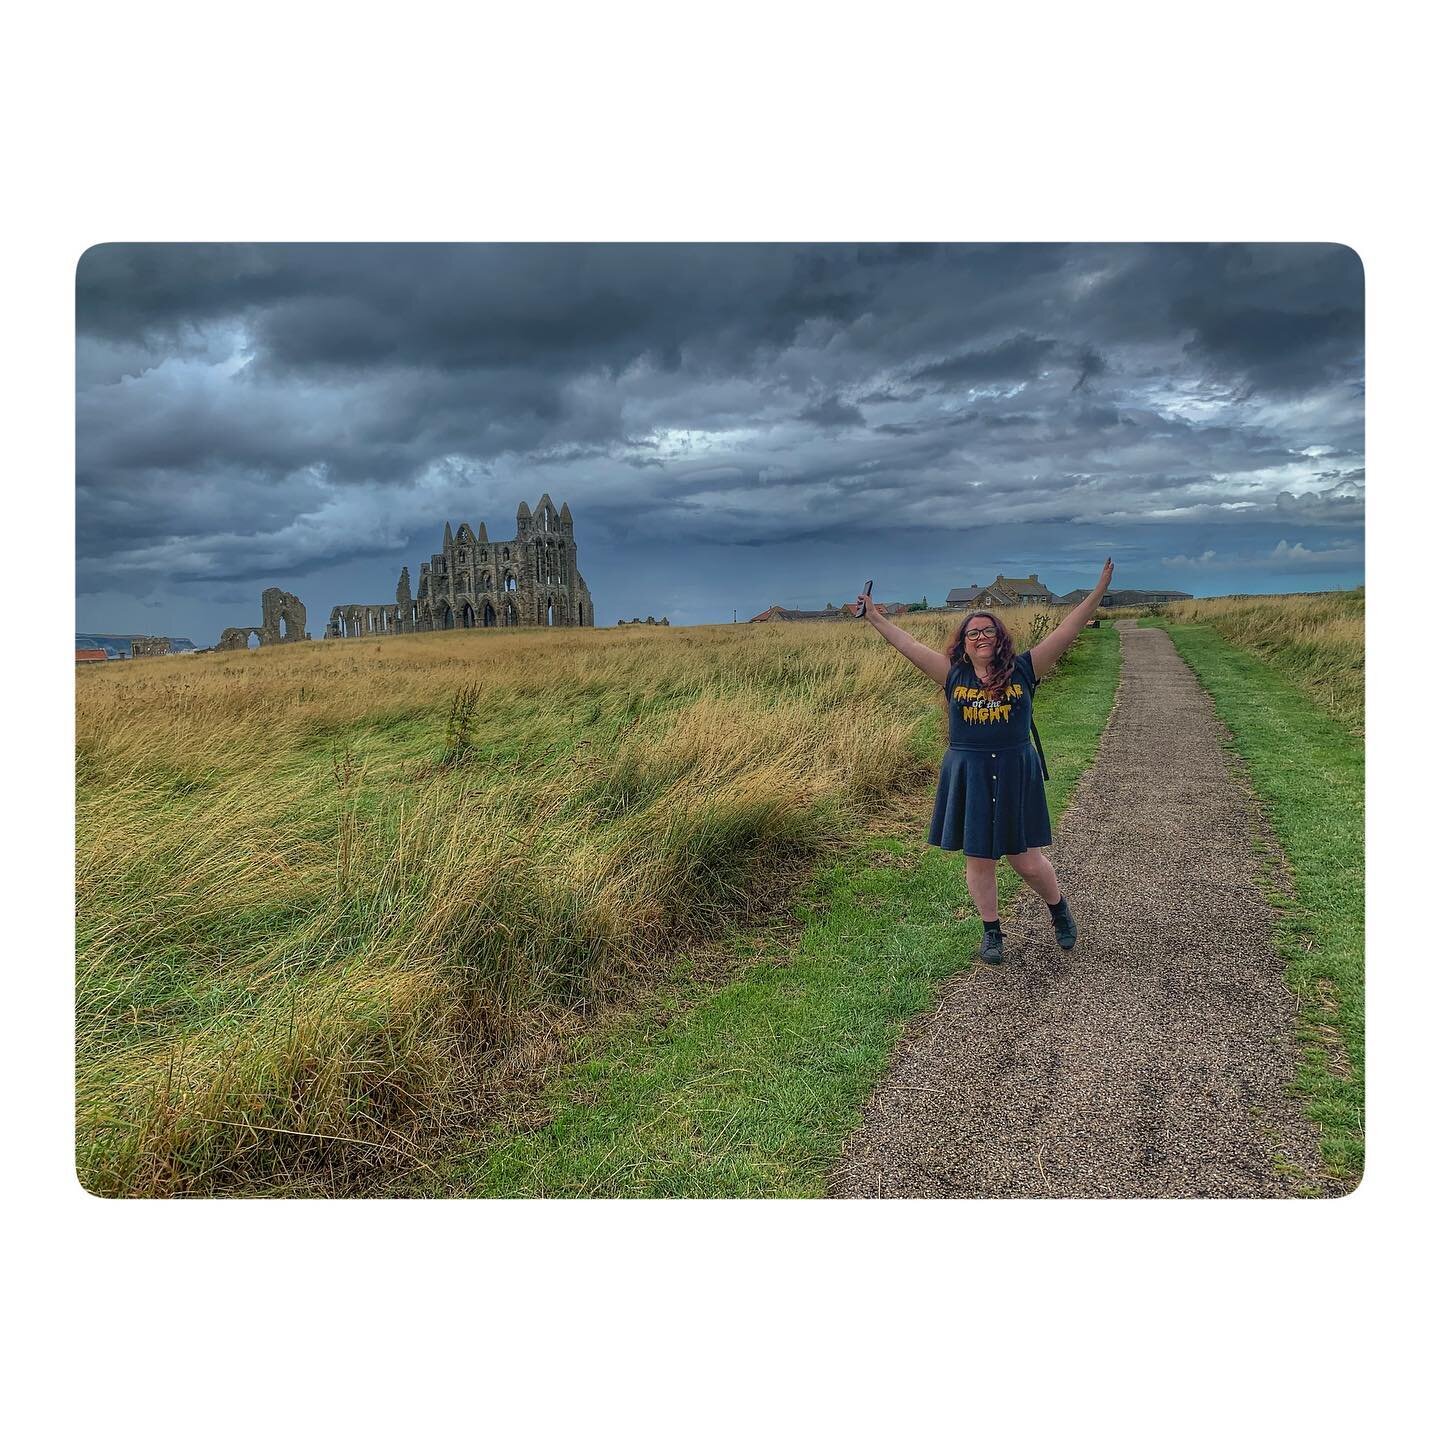 Trip to Whitby to see the ruins of the abbey.

#whitby #whitbyabbey #ruins #gothic #architecture